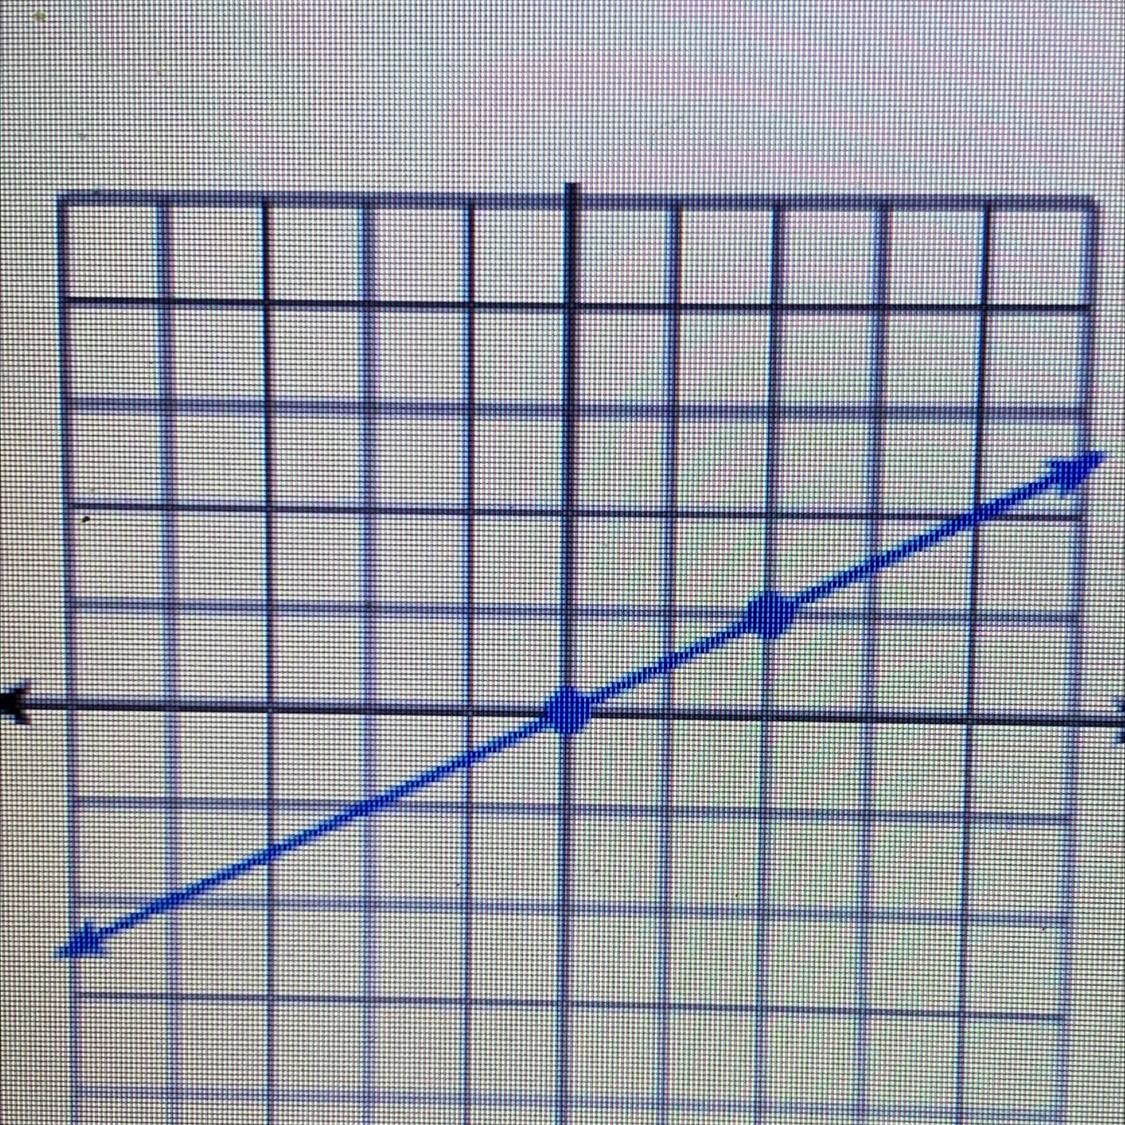 What Is The Slope?A) 2/1B)1/2C)-2/1D)-1/2